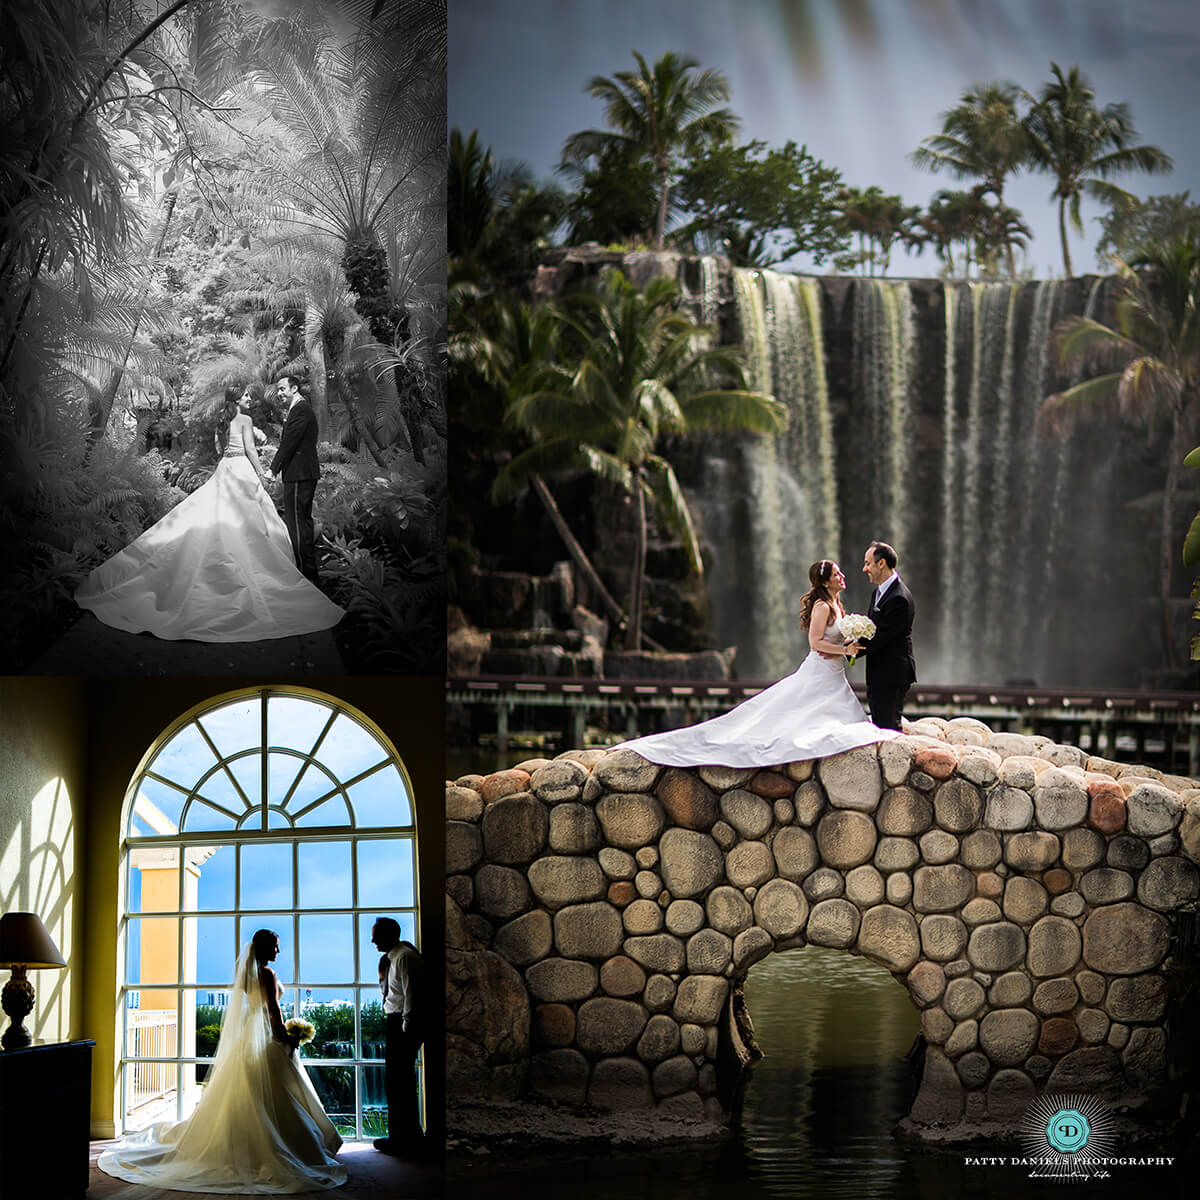 Patty Daniels Florida Photographers Collages